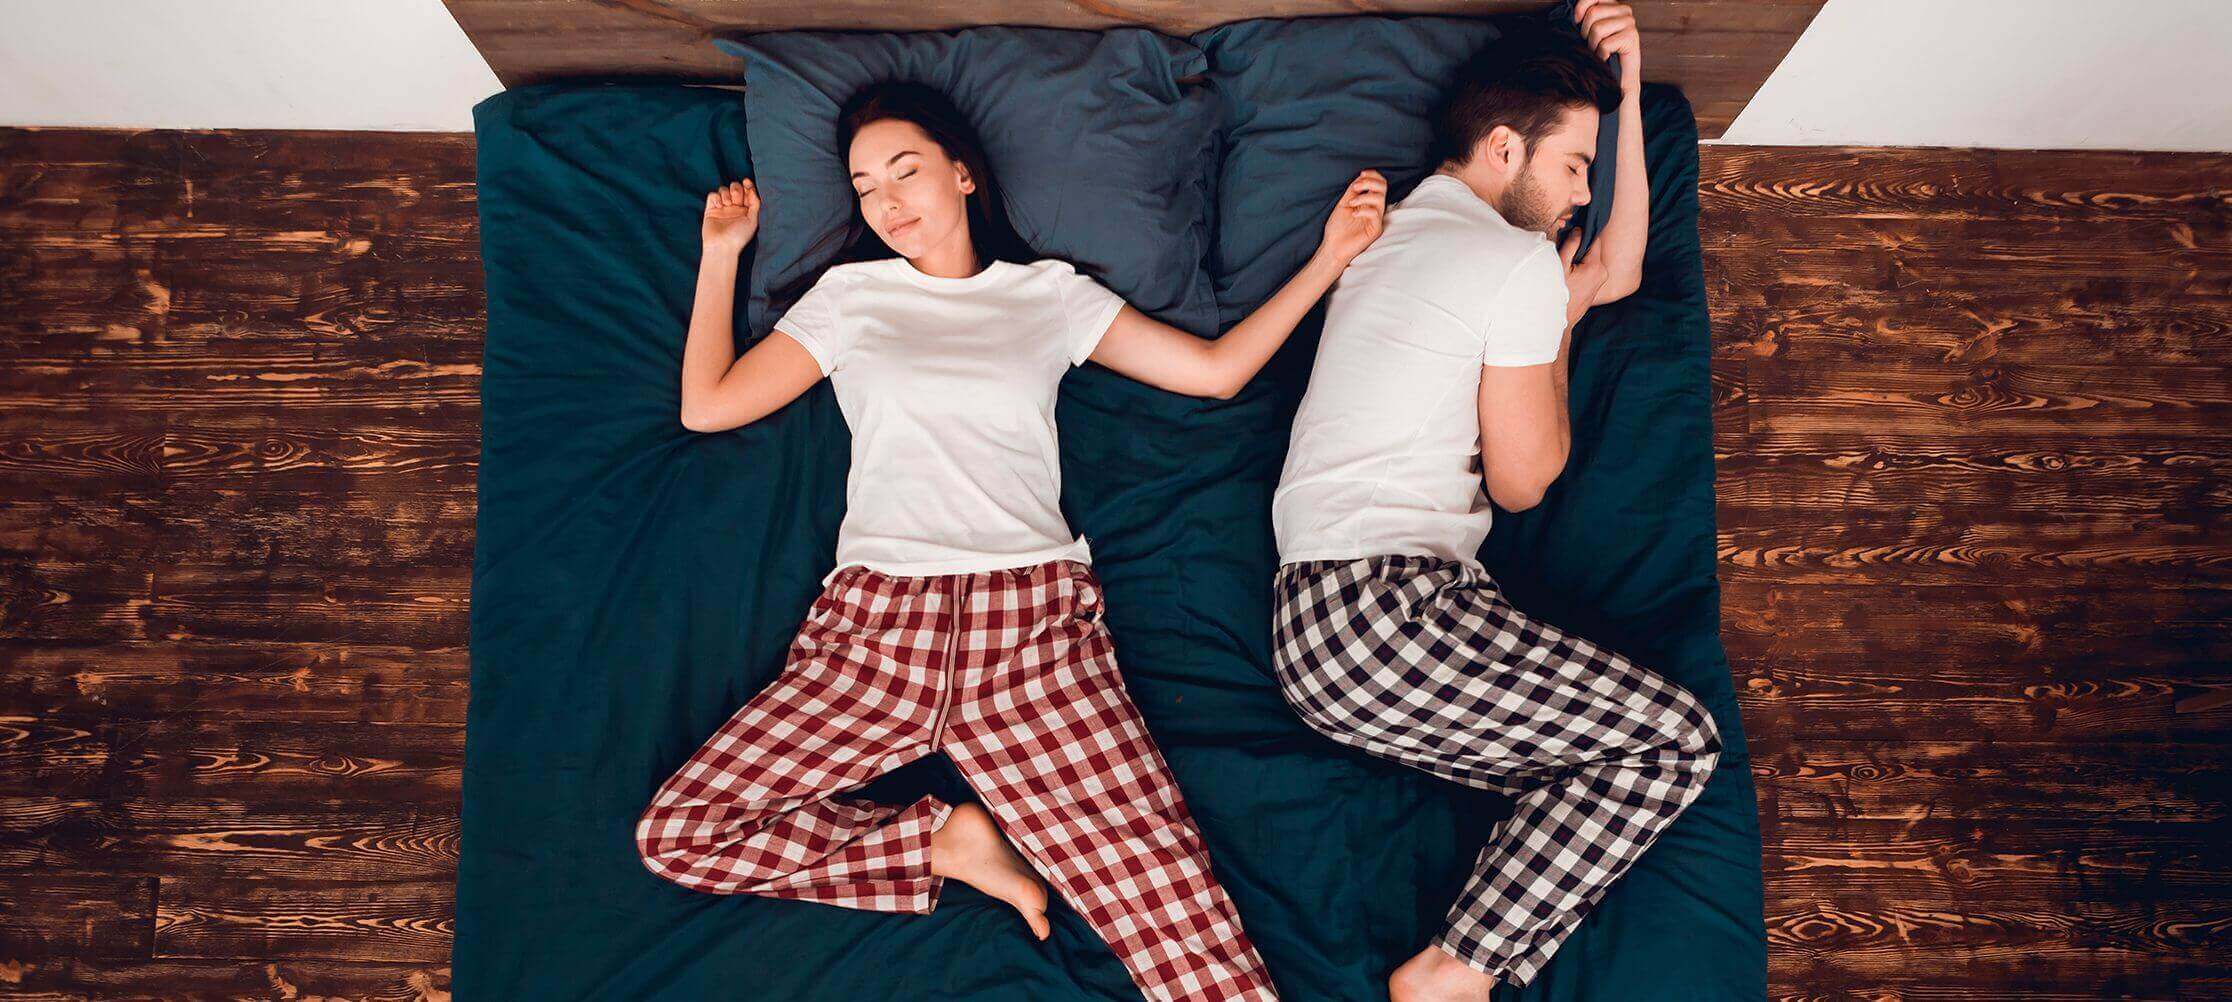 Sleeping positions that could be relationship red flags | Daily Mail Online